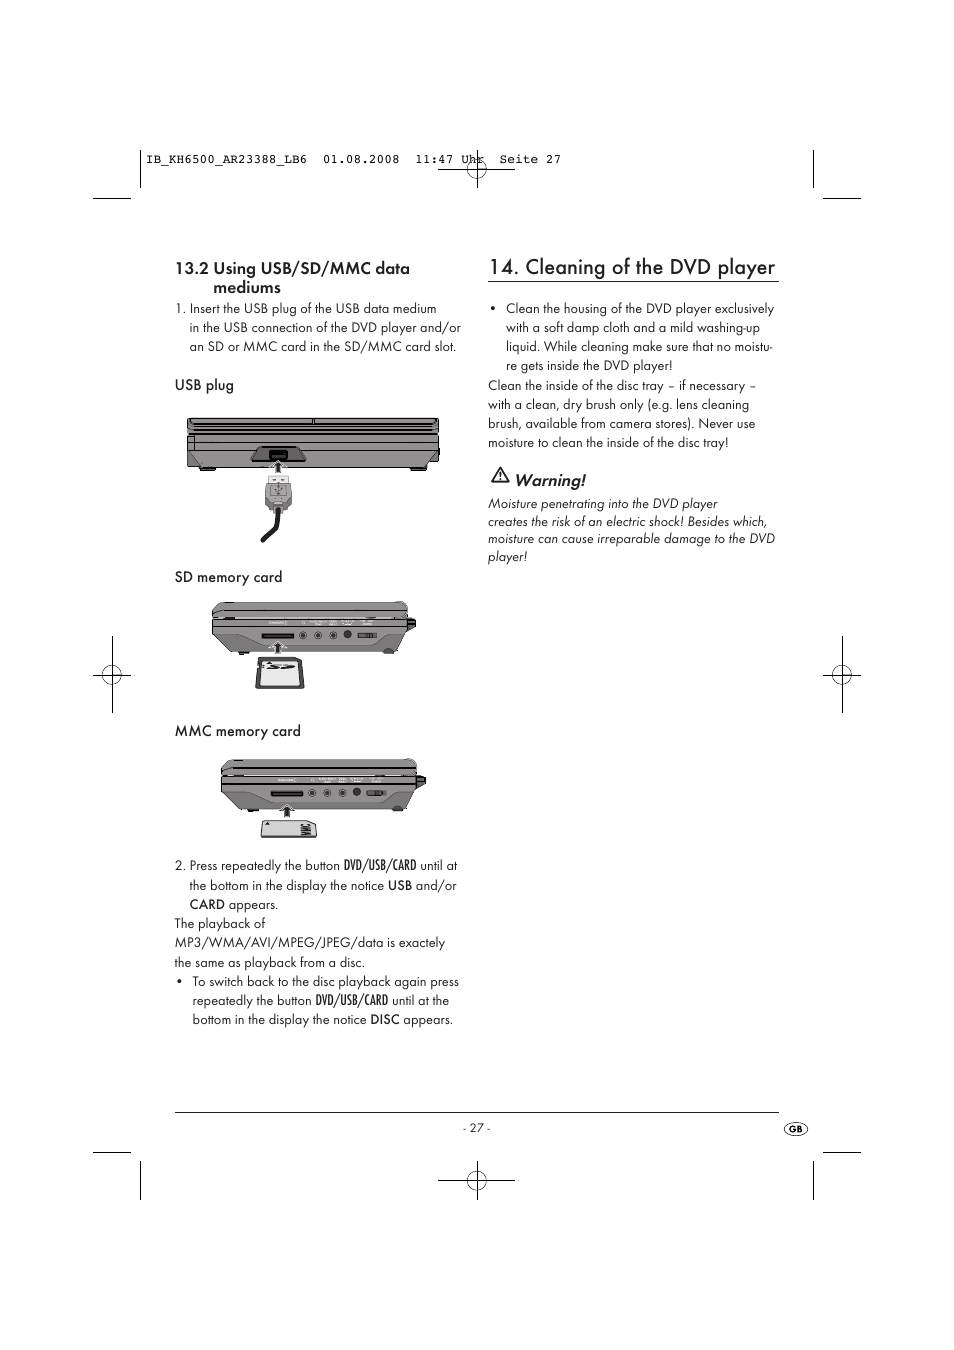 Cleaning of the dvd player | Silvercrest KH6500-06/08-V1 User Manual | Page  29 / 36 | Original mode